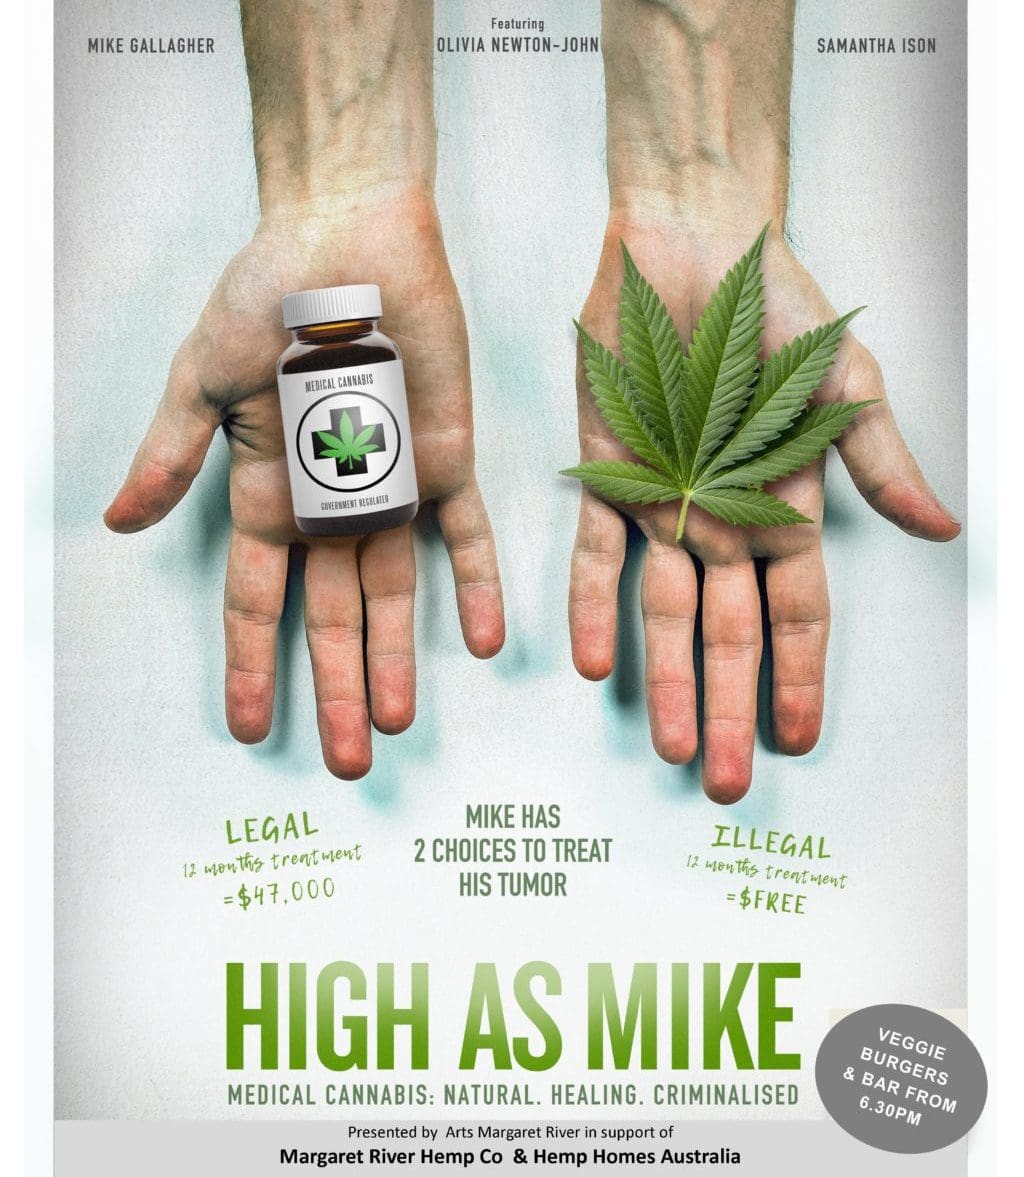 High as mike poster e1561956435325